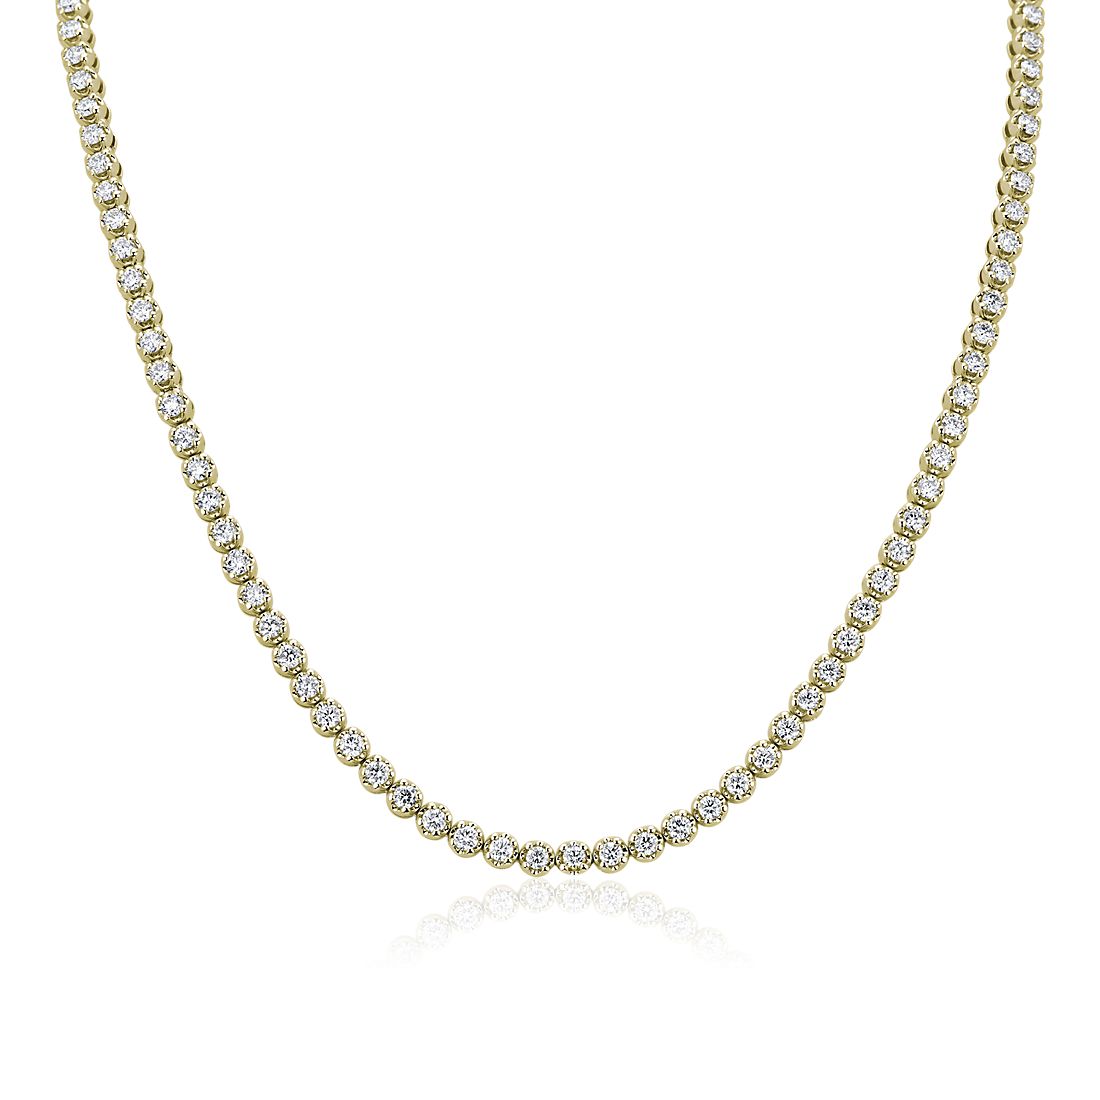 Straight Diamond Eternity Necklace in Yellow Gold (7 ct. tw.)